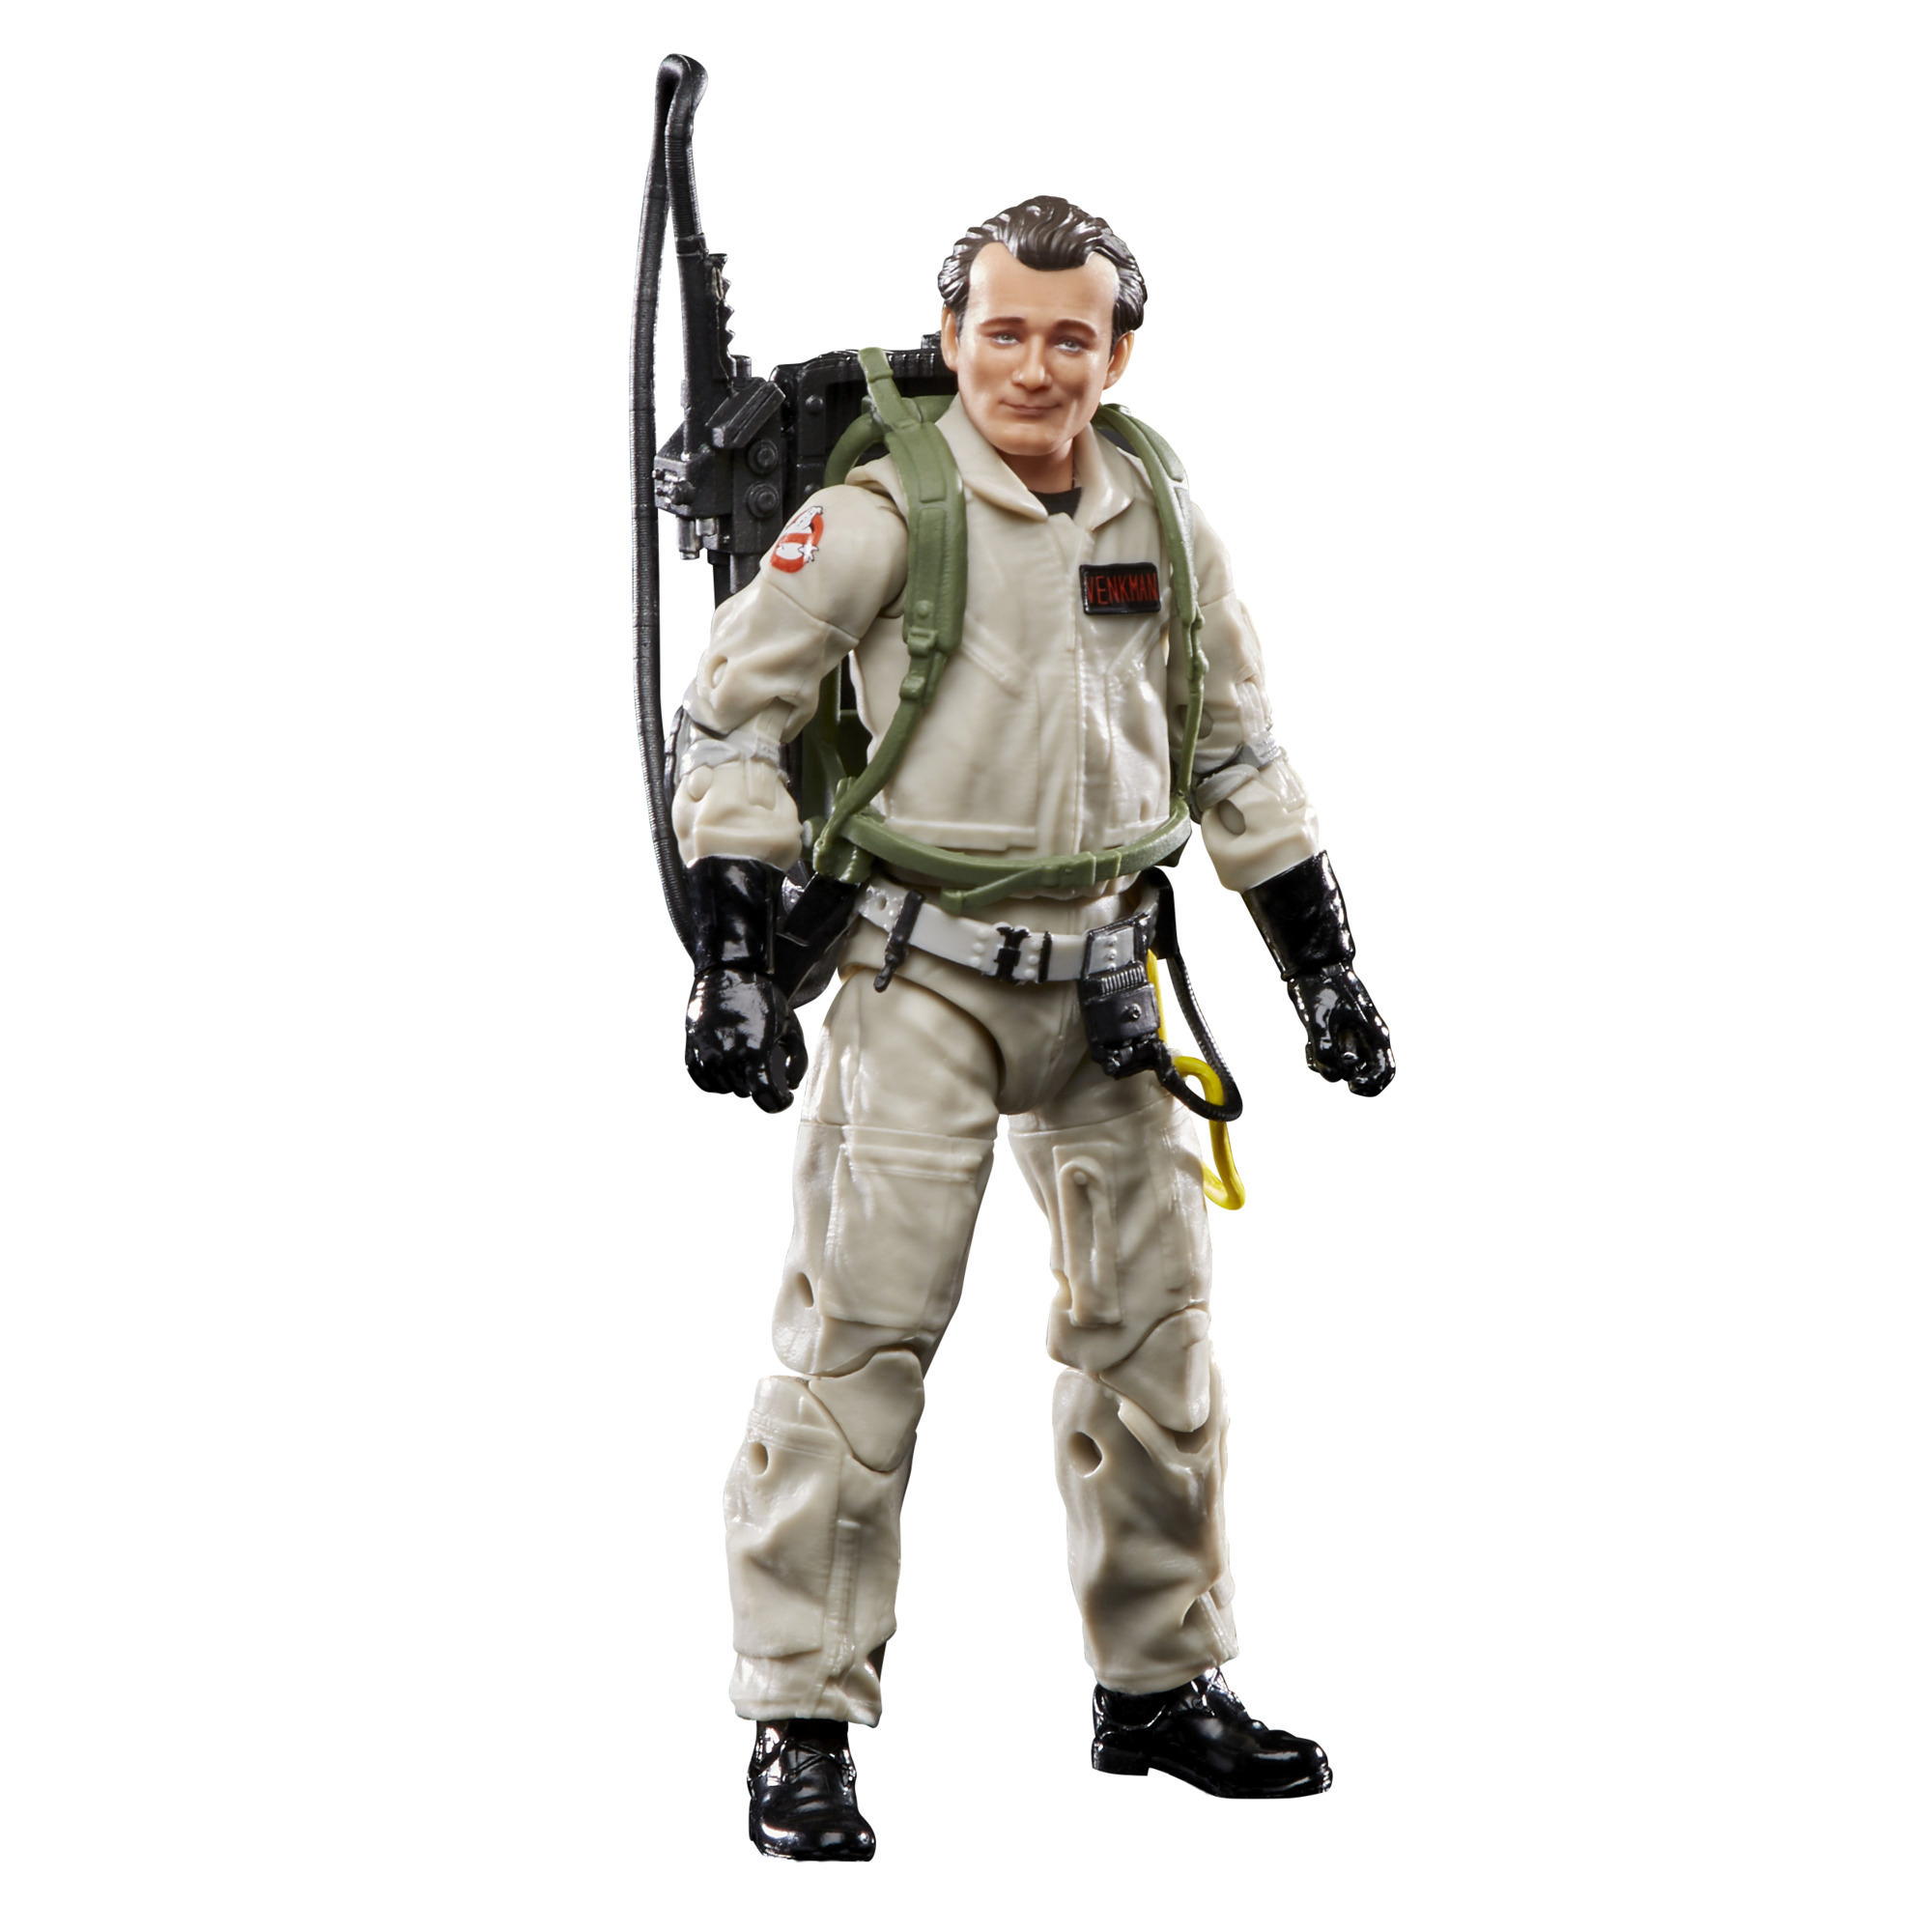 Ghostbusters Plasma Series Peter Venkman Toy 6-Inch-Scale Collectible Classic 1984 Ghostbusters Figure, Kids Ages 4 and Up